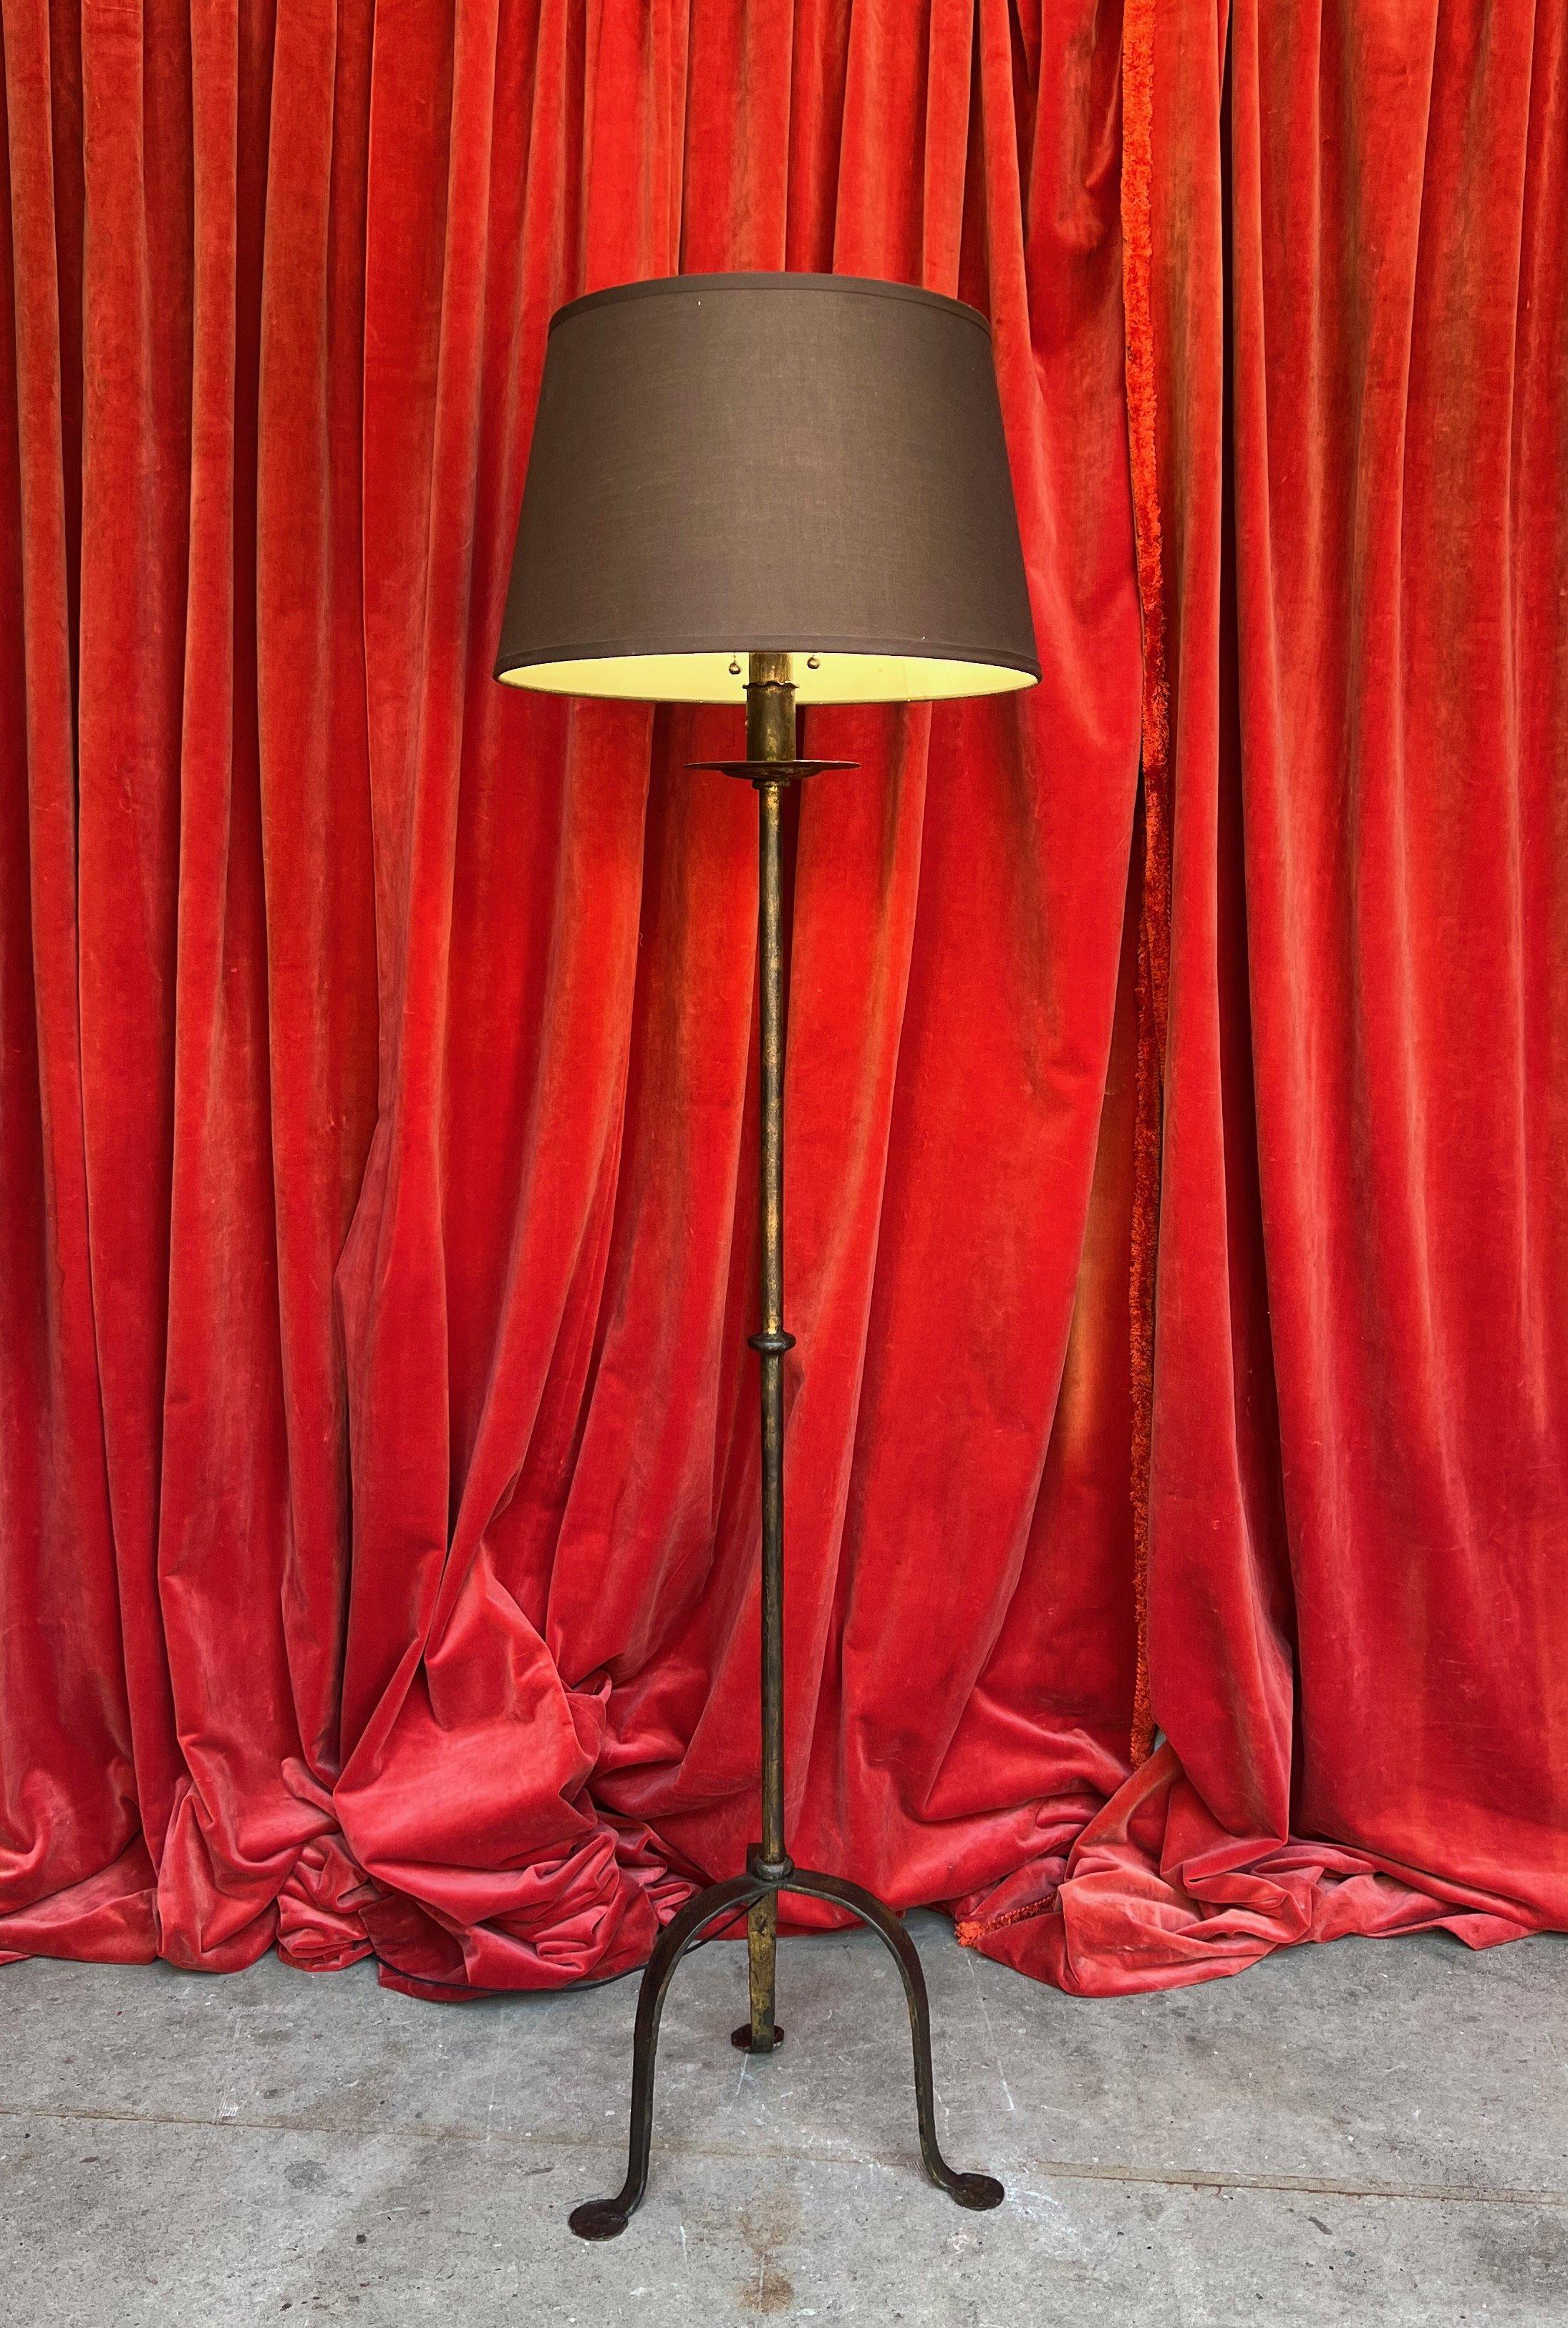 This amazing Spanish dark patinated iron floor lamp is a stunning example of mid-century design, hailing from the 1950s. This elegant wrought iron floor lamp showcases a rich deep bronze patina, exuding a sense of sophistication and timeless charm.